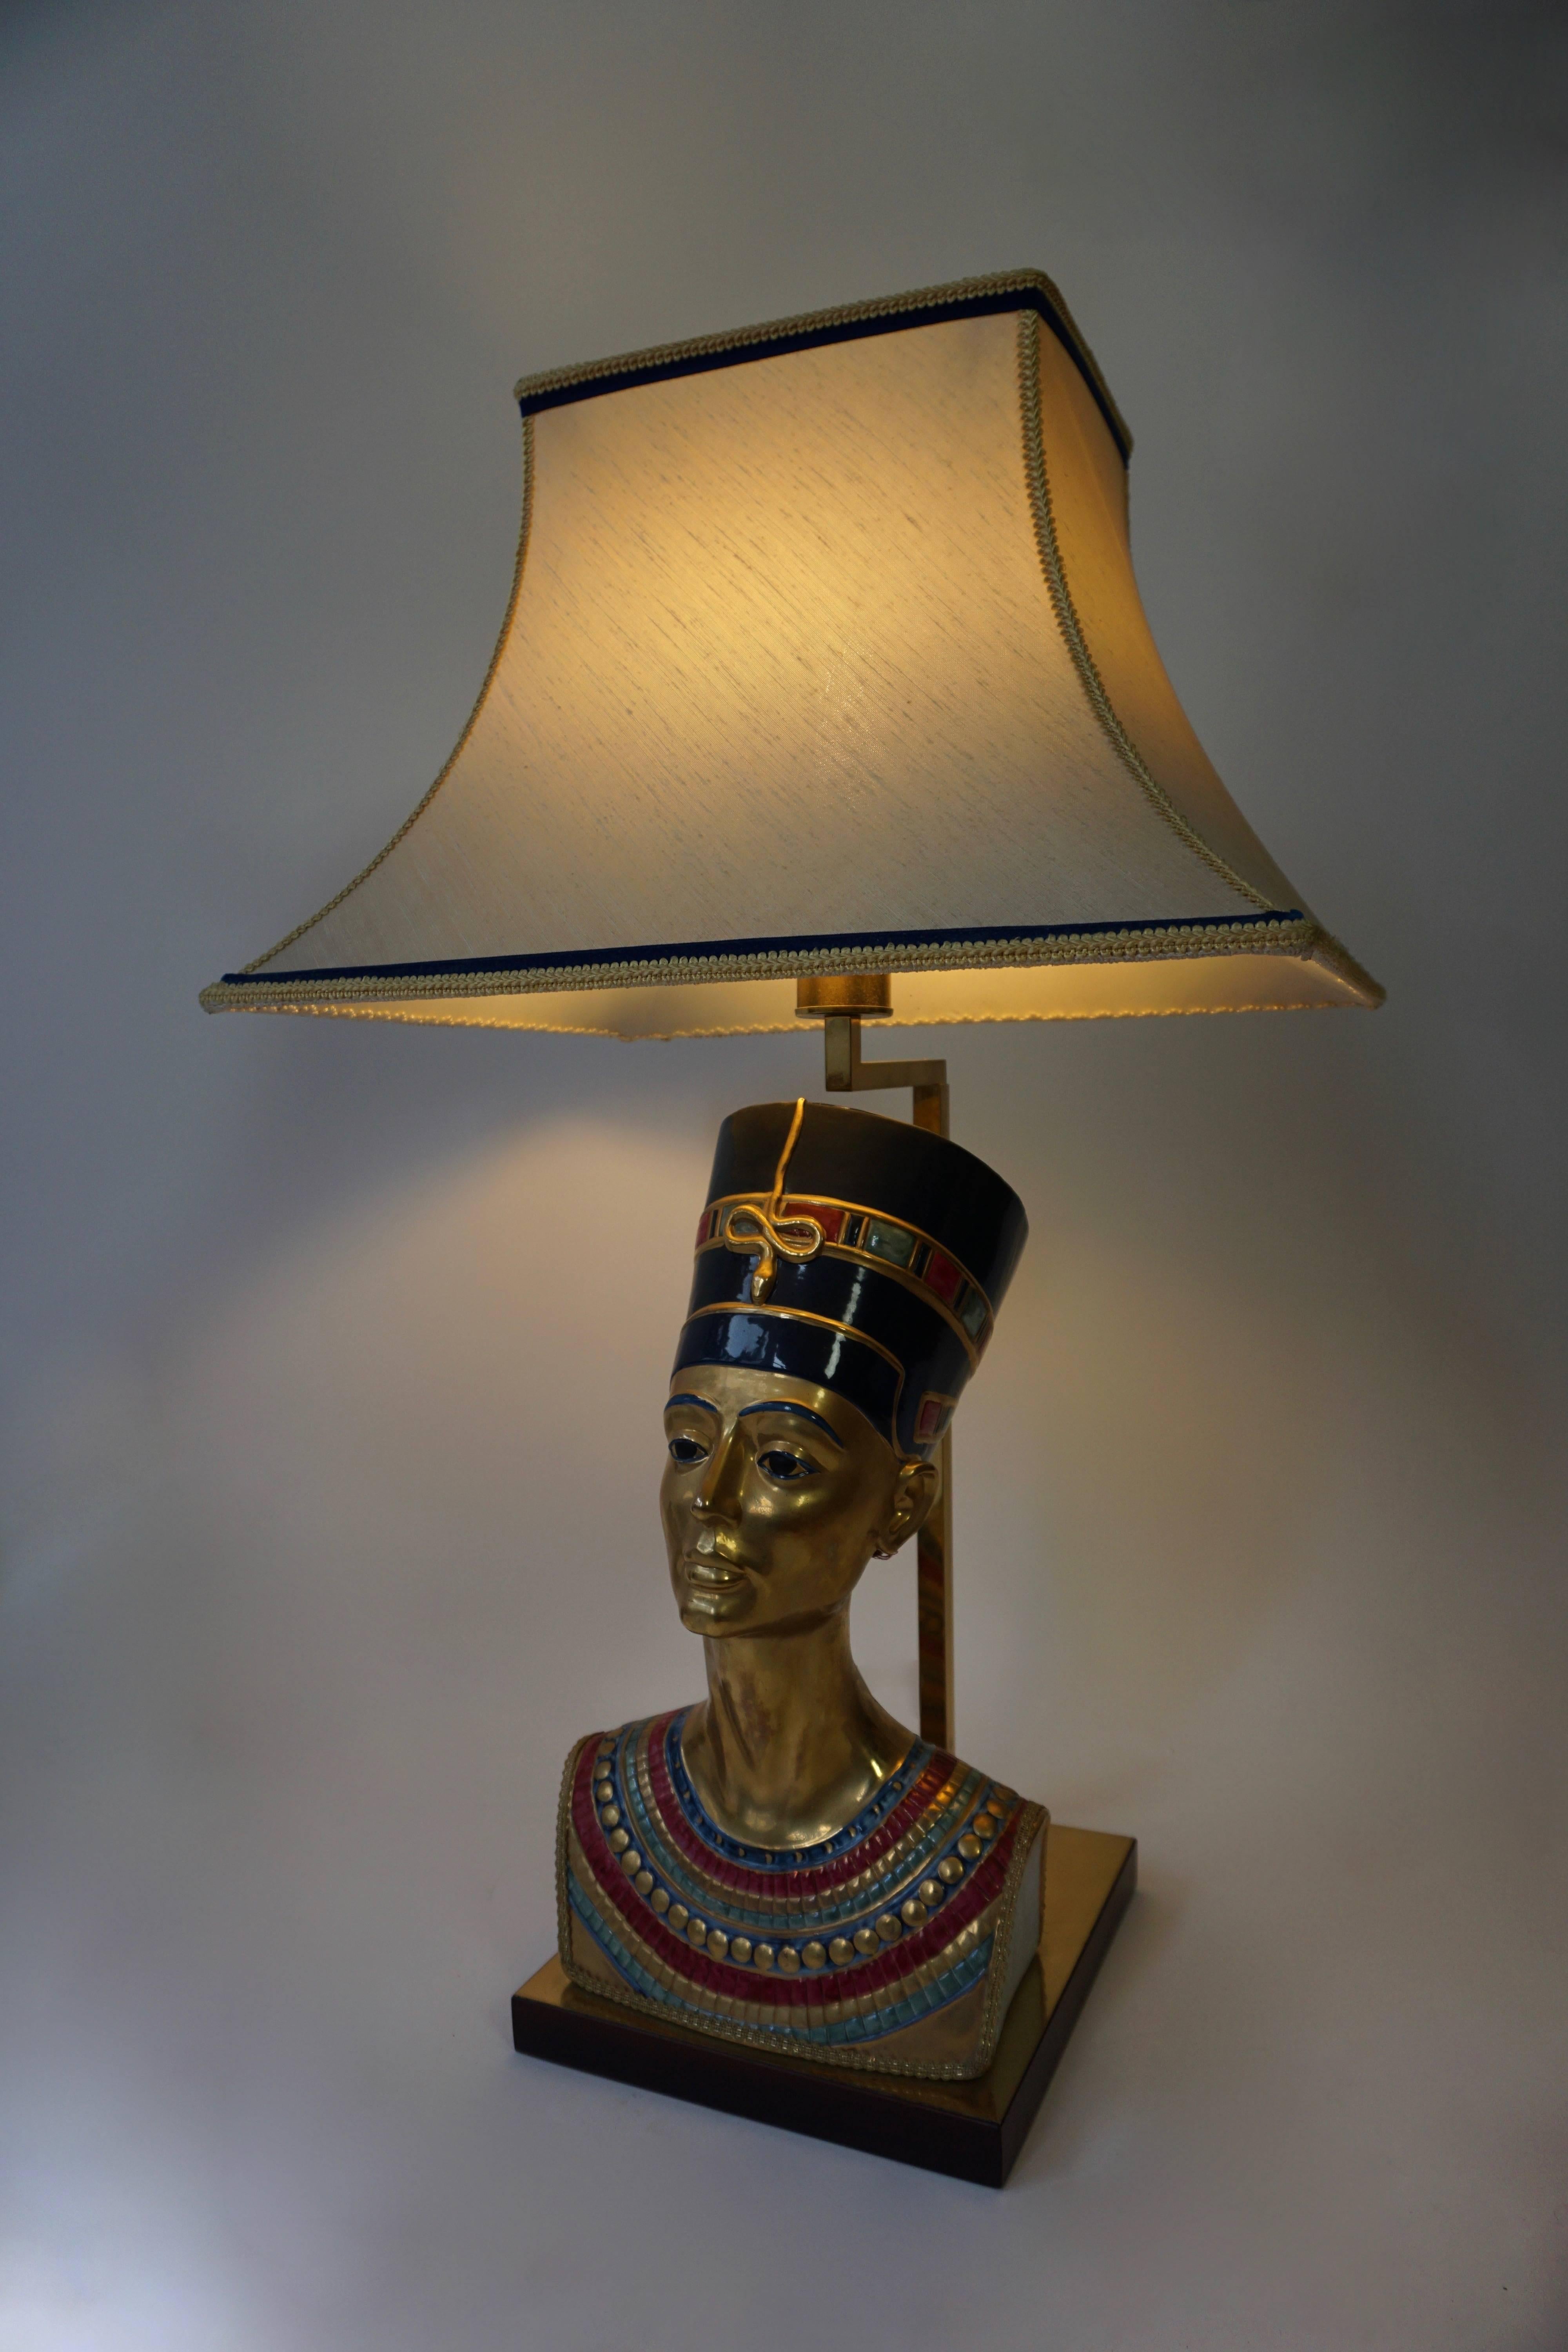 Stunning Italian porcelain table lamps depicting Egyptian Queen Nefertiti. Amazing detailed chiseled features, jewels and head piece's, wonderful patina.
Signed Edoardo Tasca.
Height:86 cm.
Width:51 cm.
Depth:41 cm.